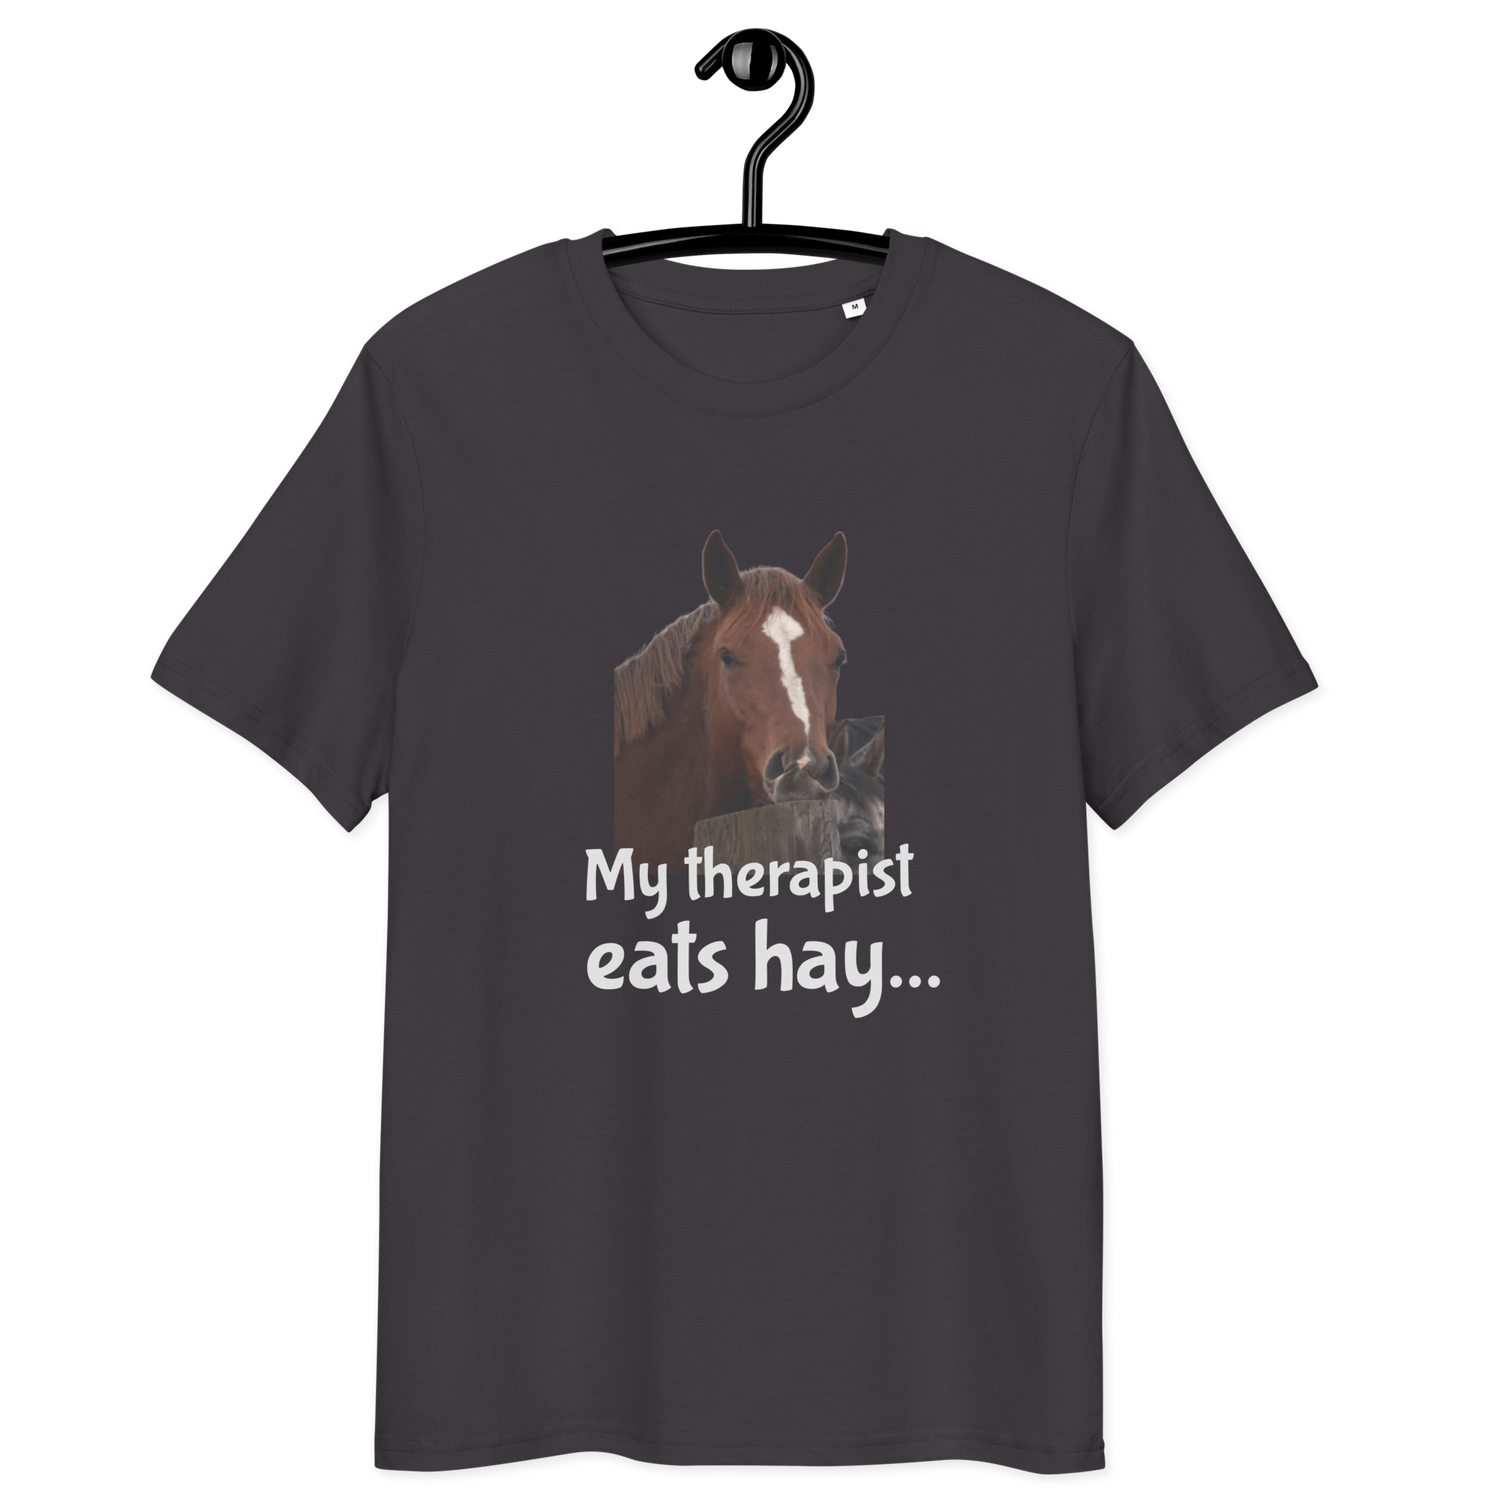 Supporting Equine & Animal Rescues